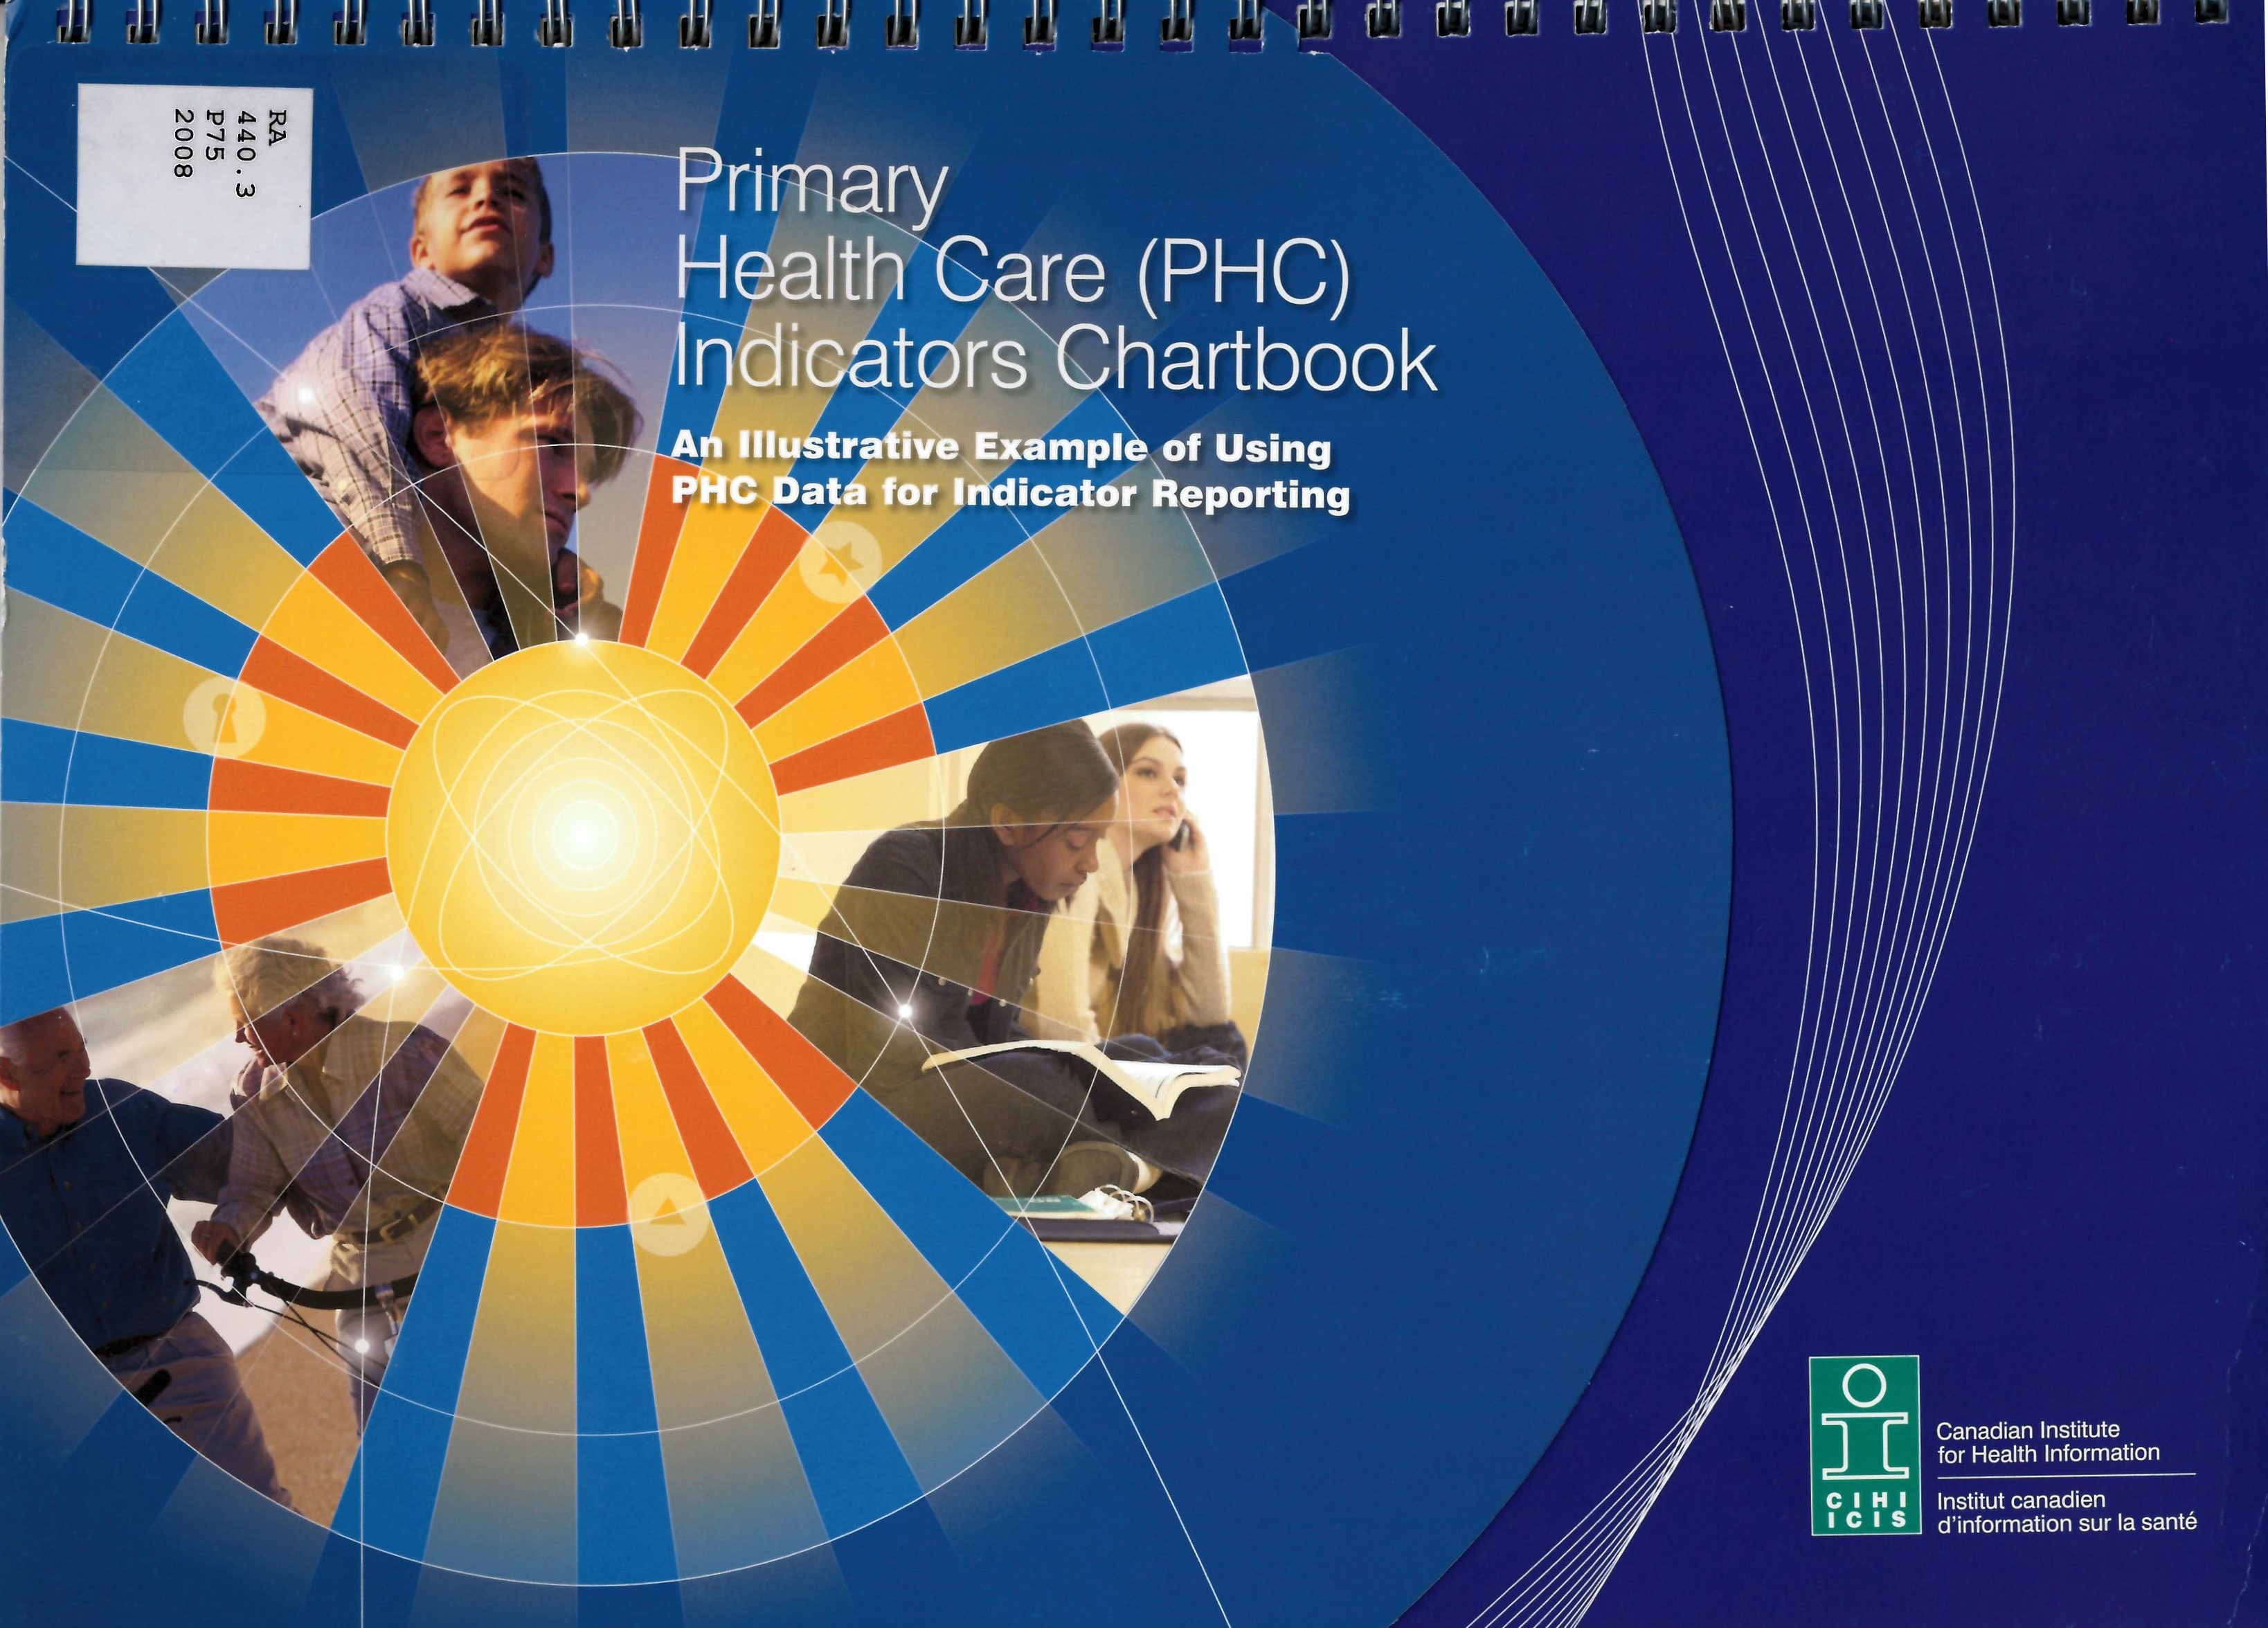 Primary health care (PHC) indicators chartbook : an illustrative example of using PHC data for indicator reporting